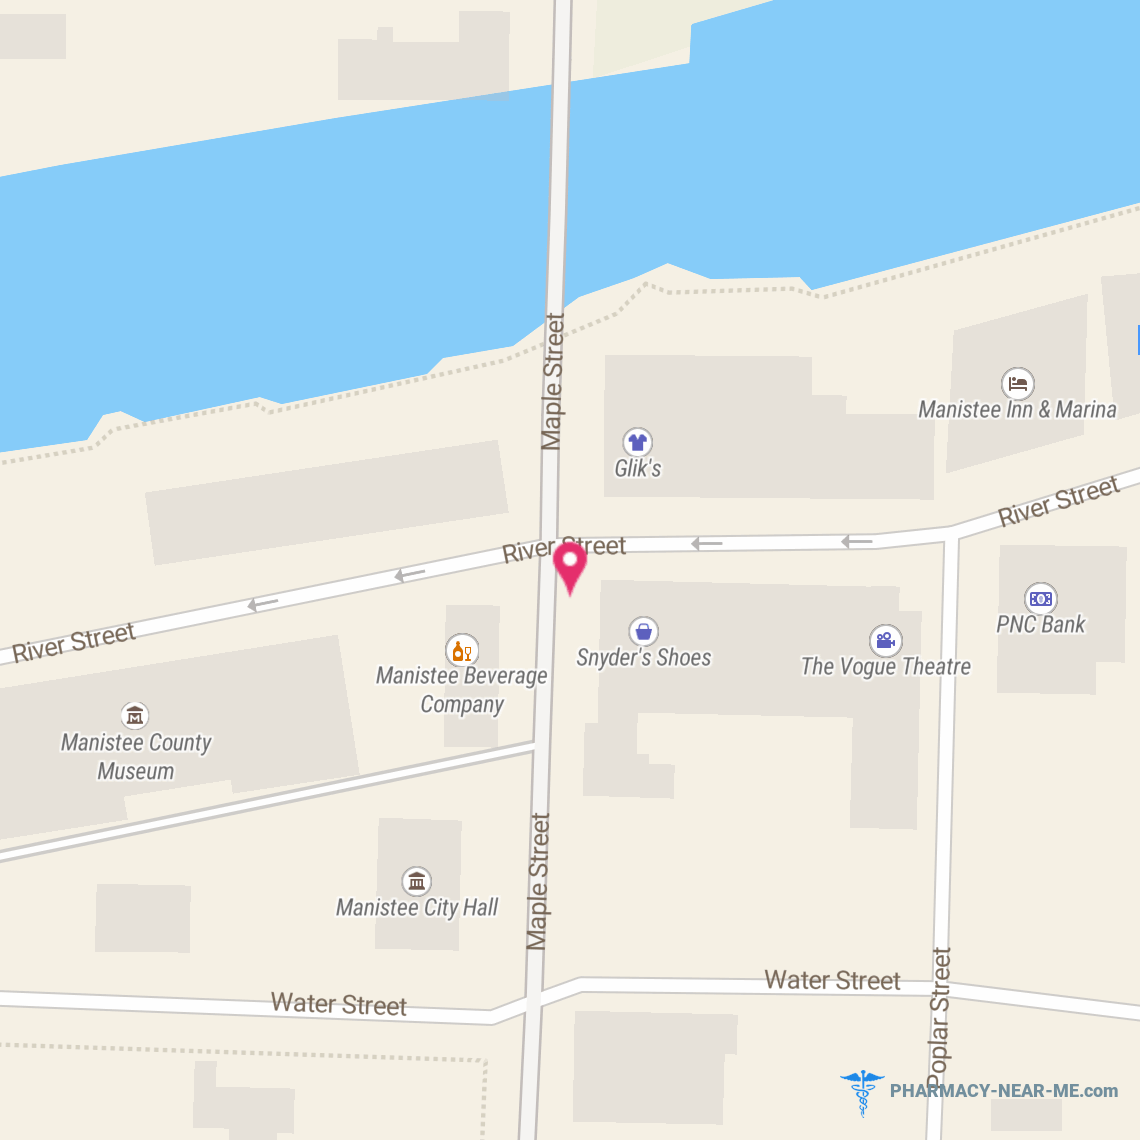 CITY DRUG STORE OF MANISTEE INC - Pharmacy Hours, Phone, Reviews & Information: 401 River Street, Manistee, Michigan 49660, United States